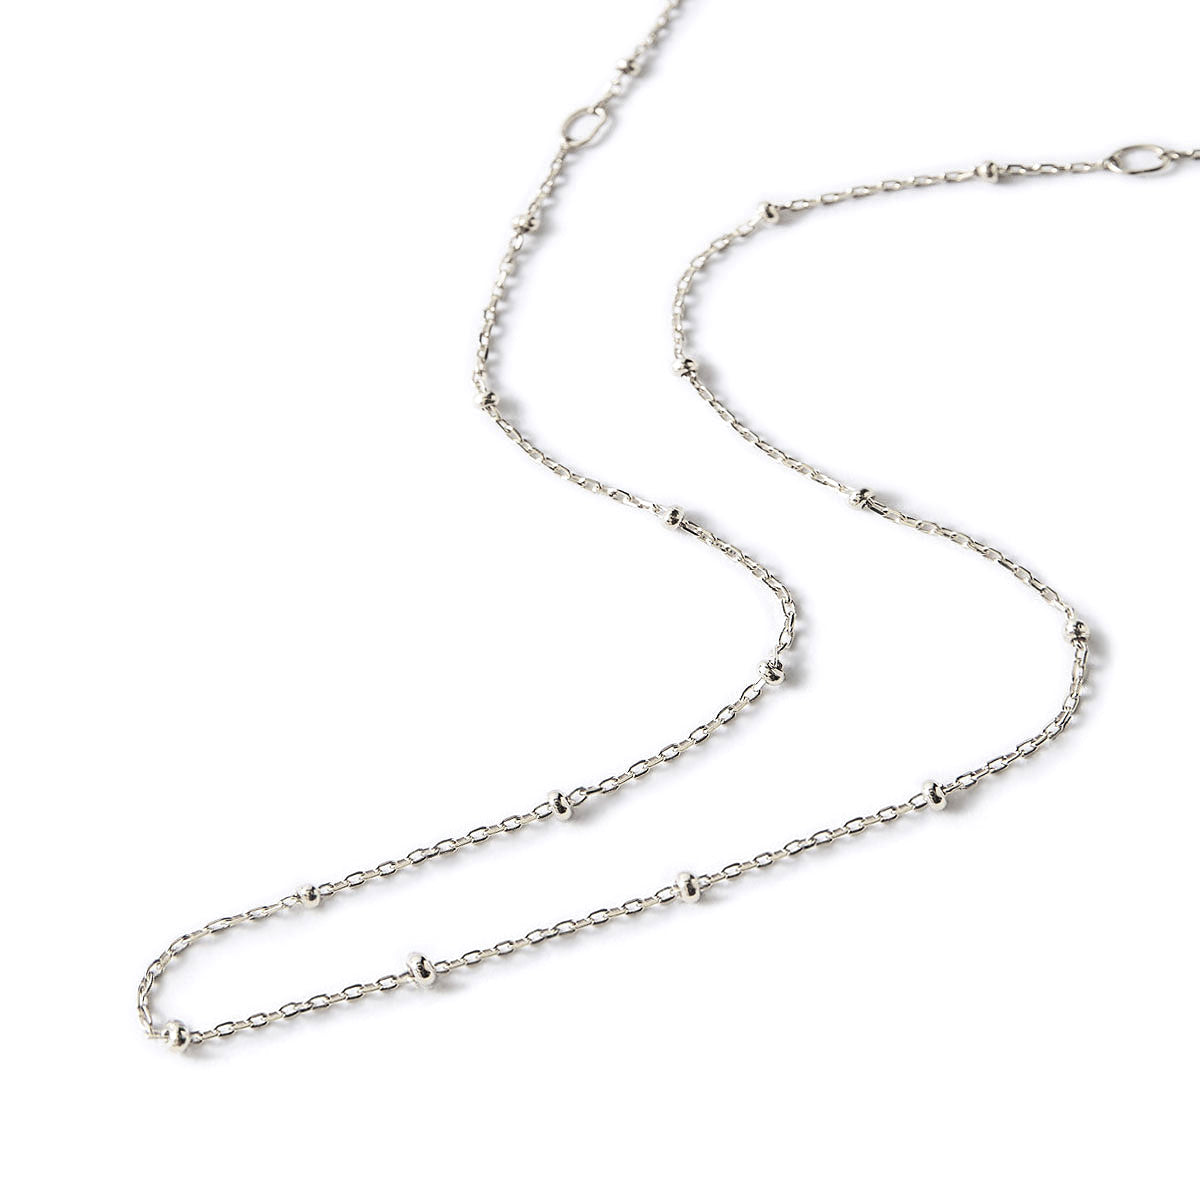 Mini Dainty Ball Chain Necklace 14K White Gold / 16 - 18 Adjustable by Baby Gold - Shop Custom Gold Jewelry